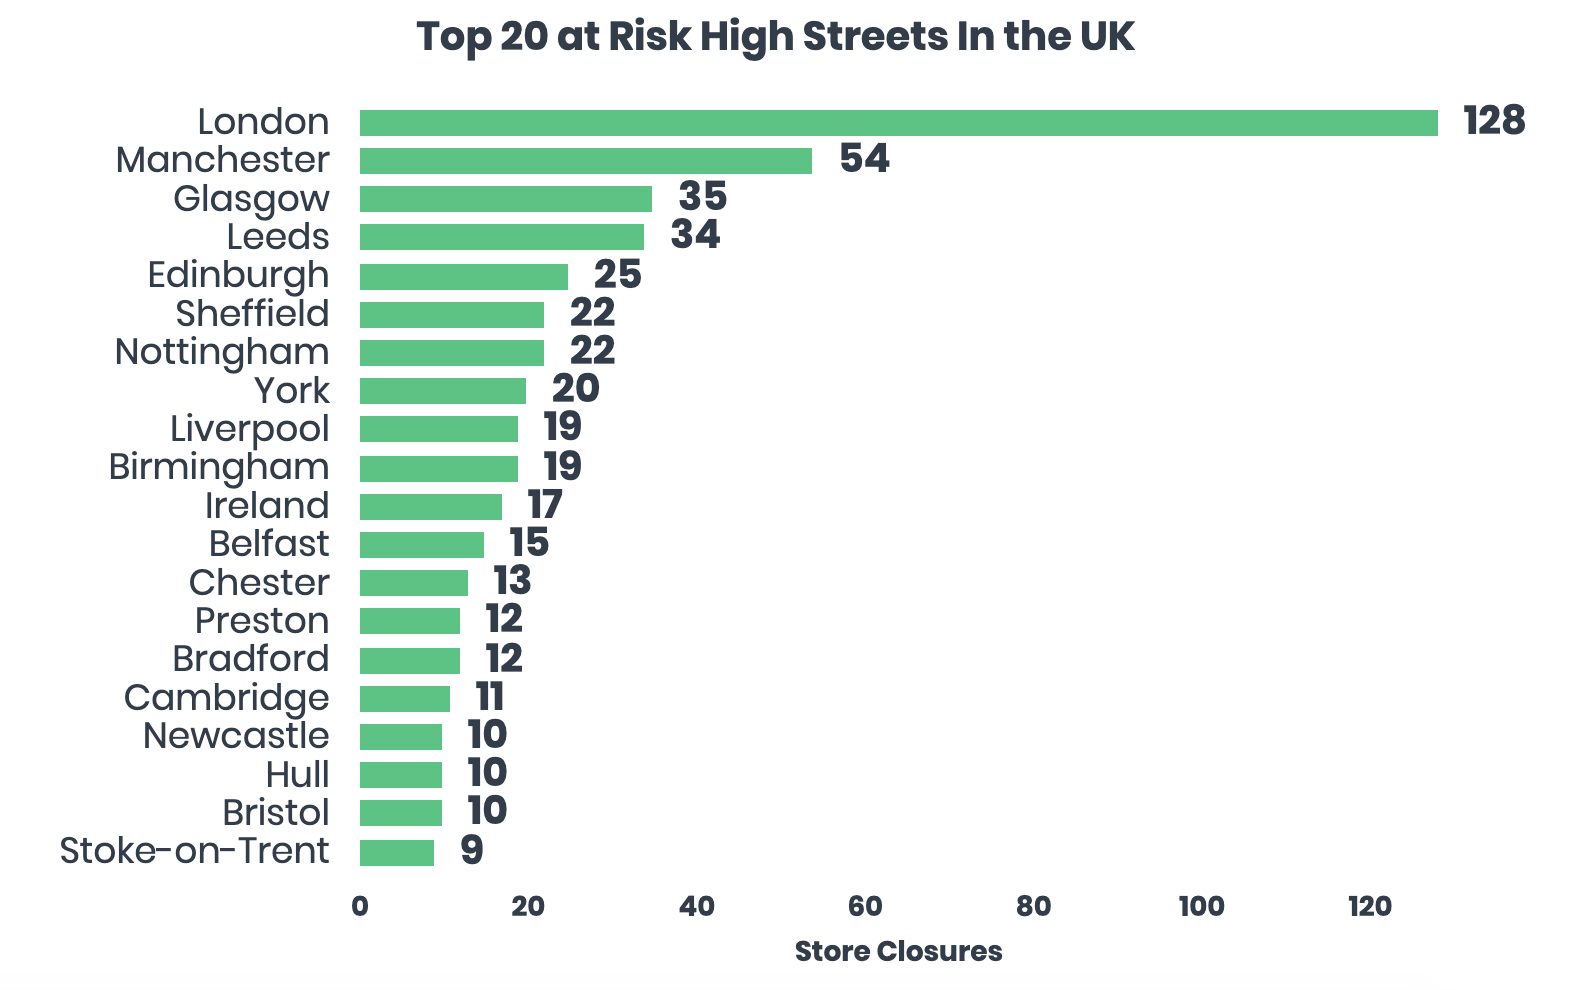 The top 20 least at risk high-streets in the UK